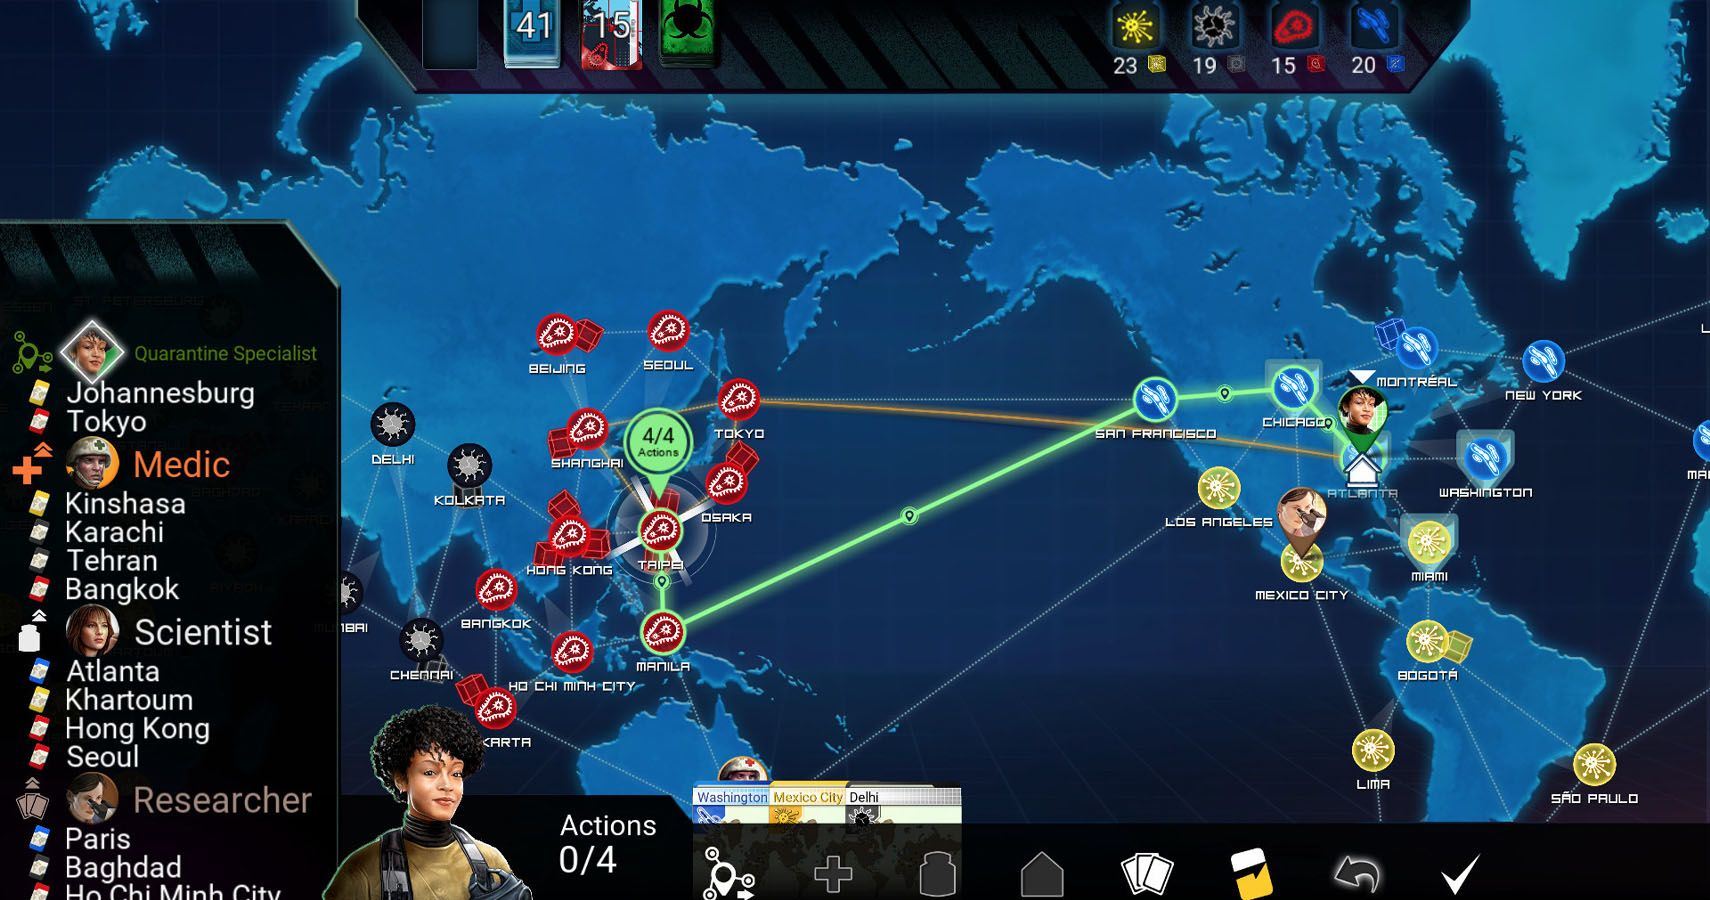 disease spread screen from Pandemic game